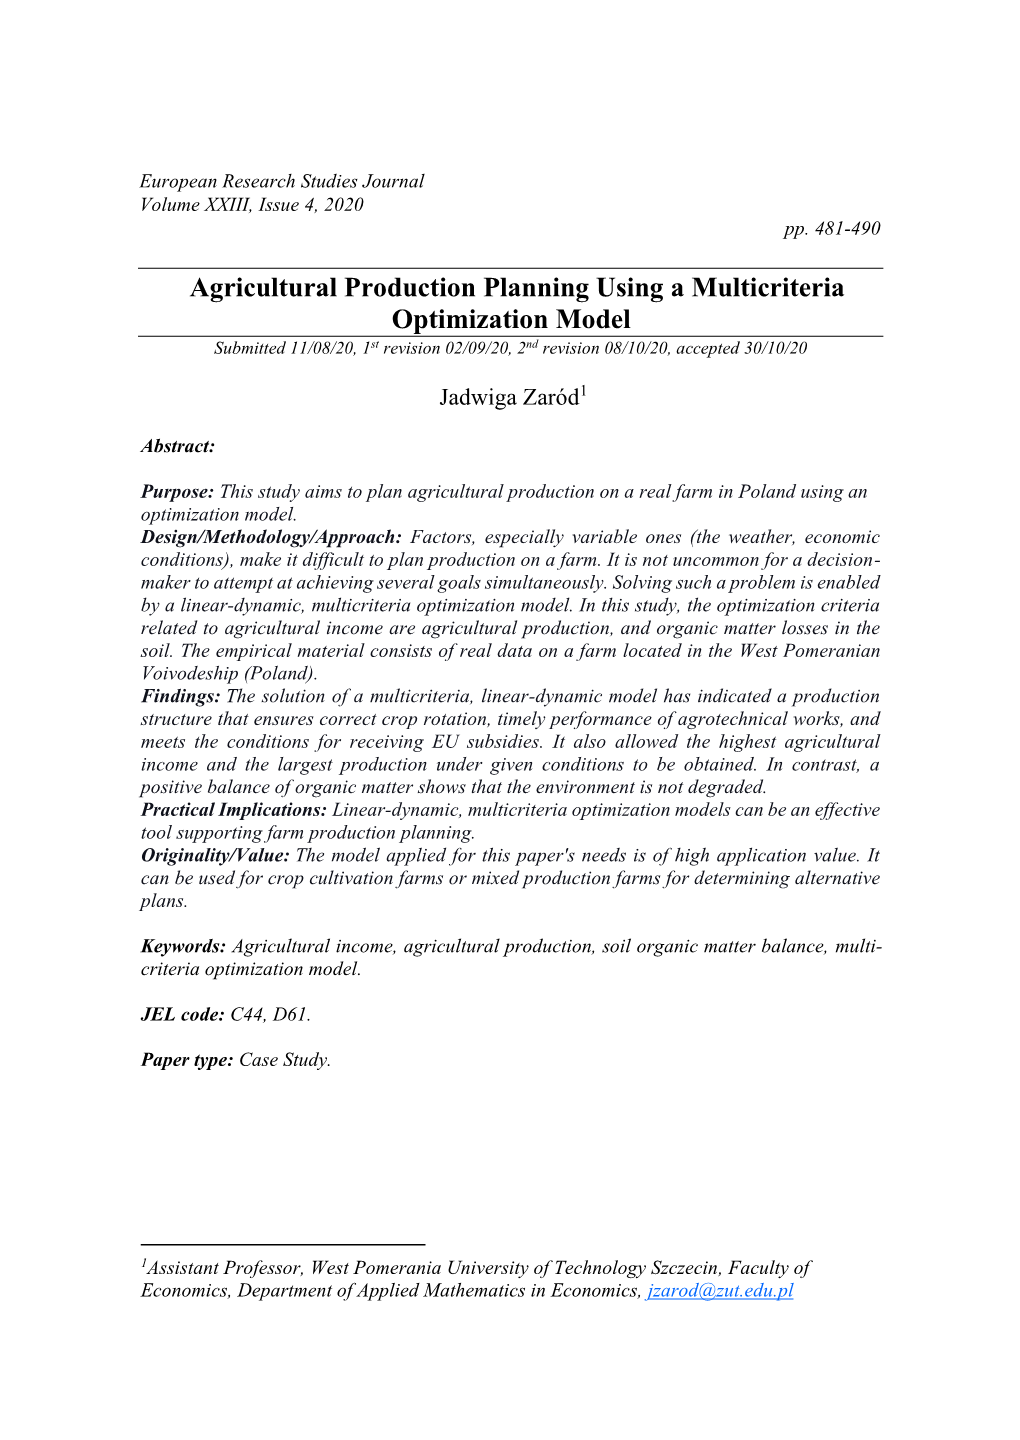 Agricultural Production Planning Using a Multicriteria Optimization Model Submitted 11/08/20, 1St Revision 02/09/20, 2Nd Revision 08/10/20, Accepted 30/10/20